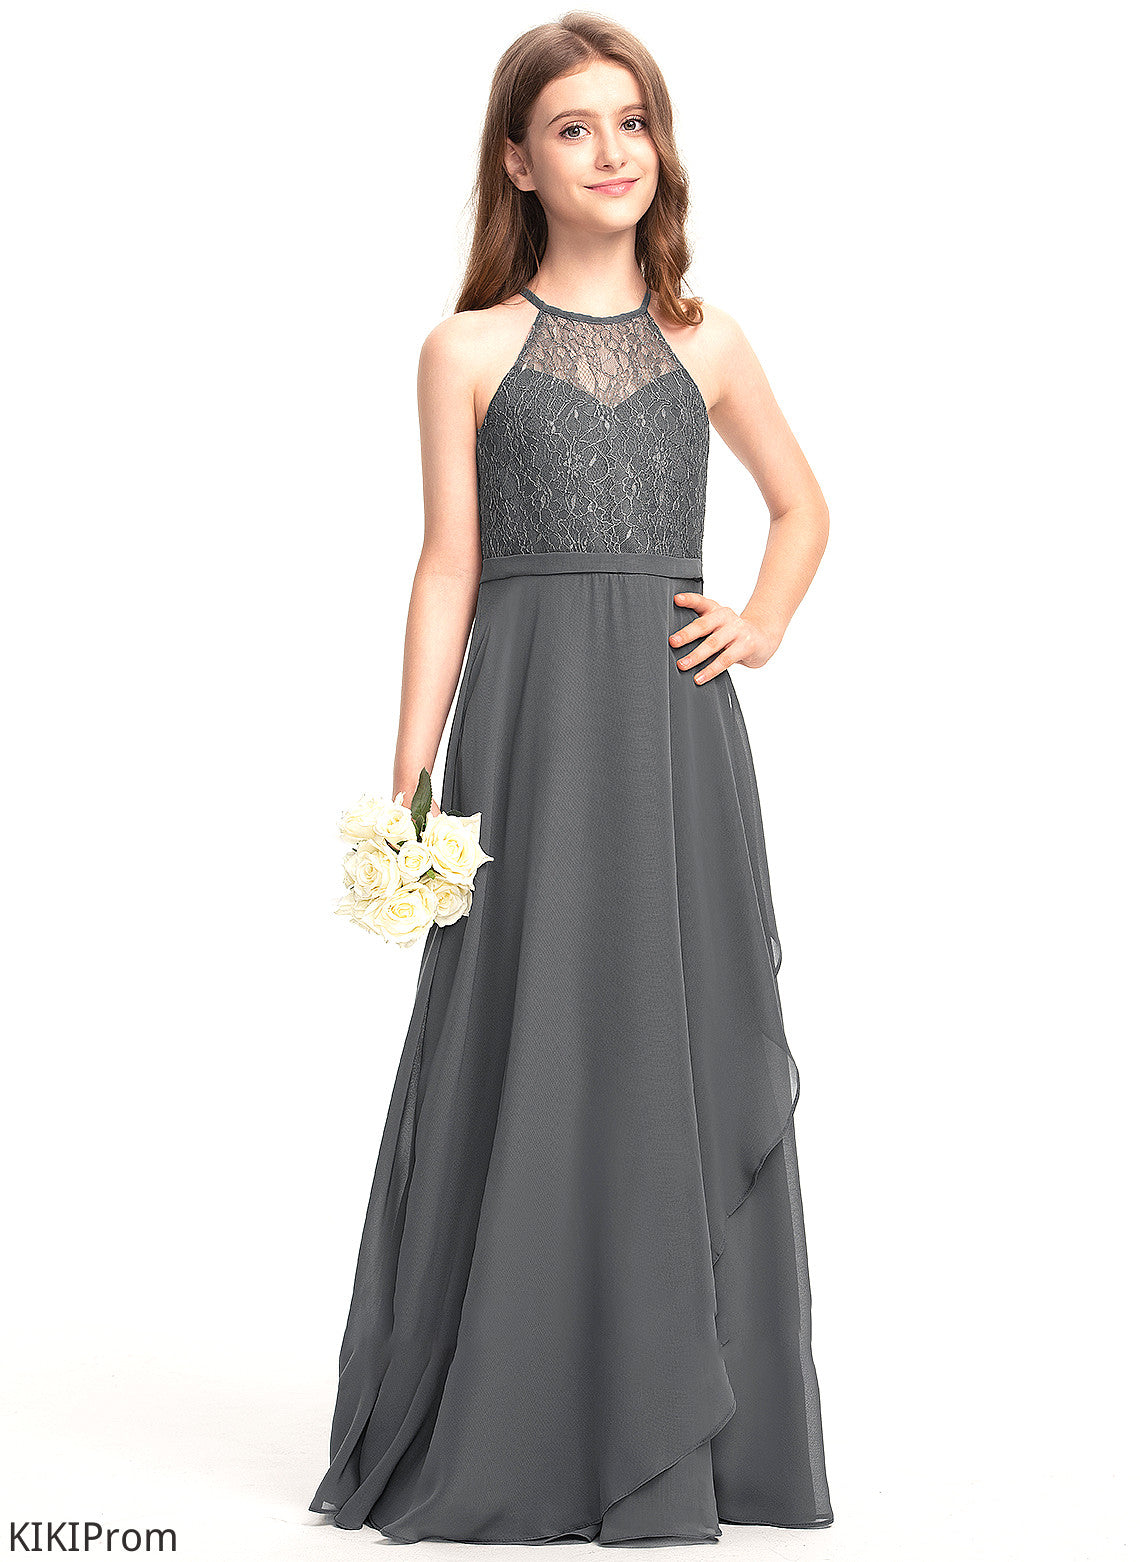 Addyson With Neck Junior Bridesmaid Dresses Floor-Length Scoop A-Line Ruffles Lace Chiffon Cascading